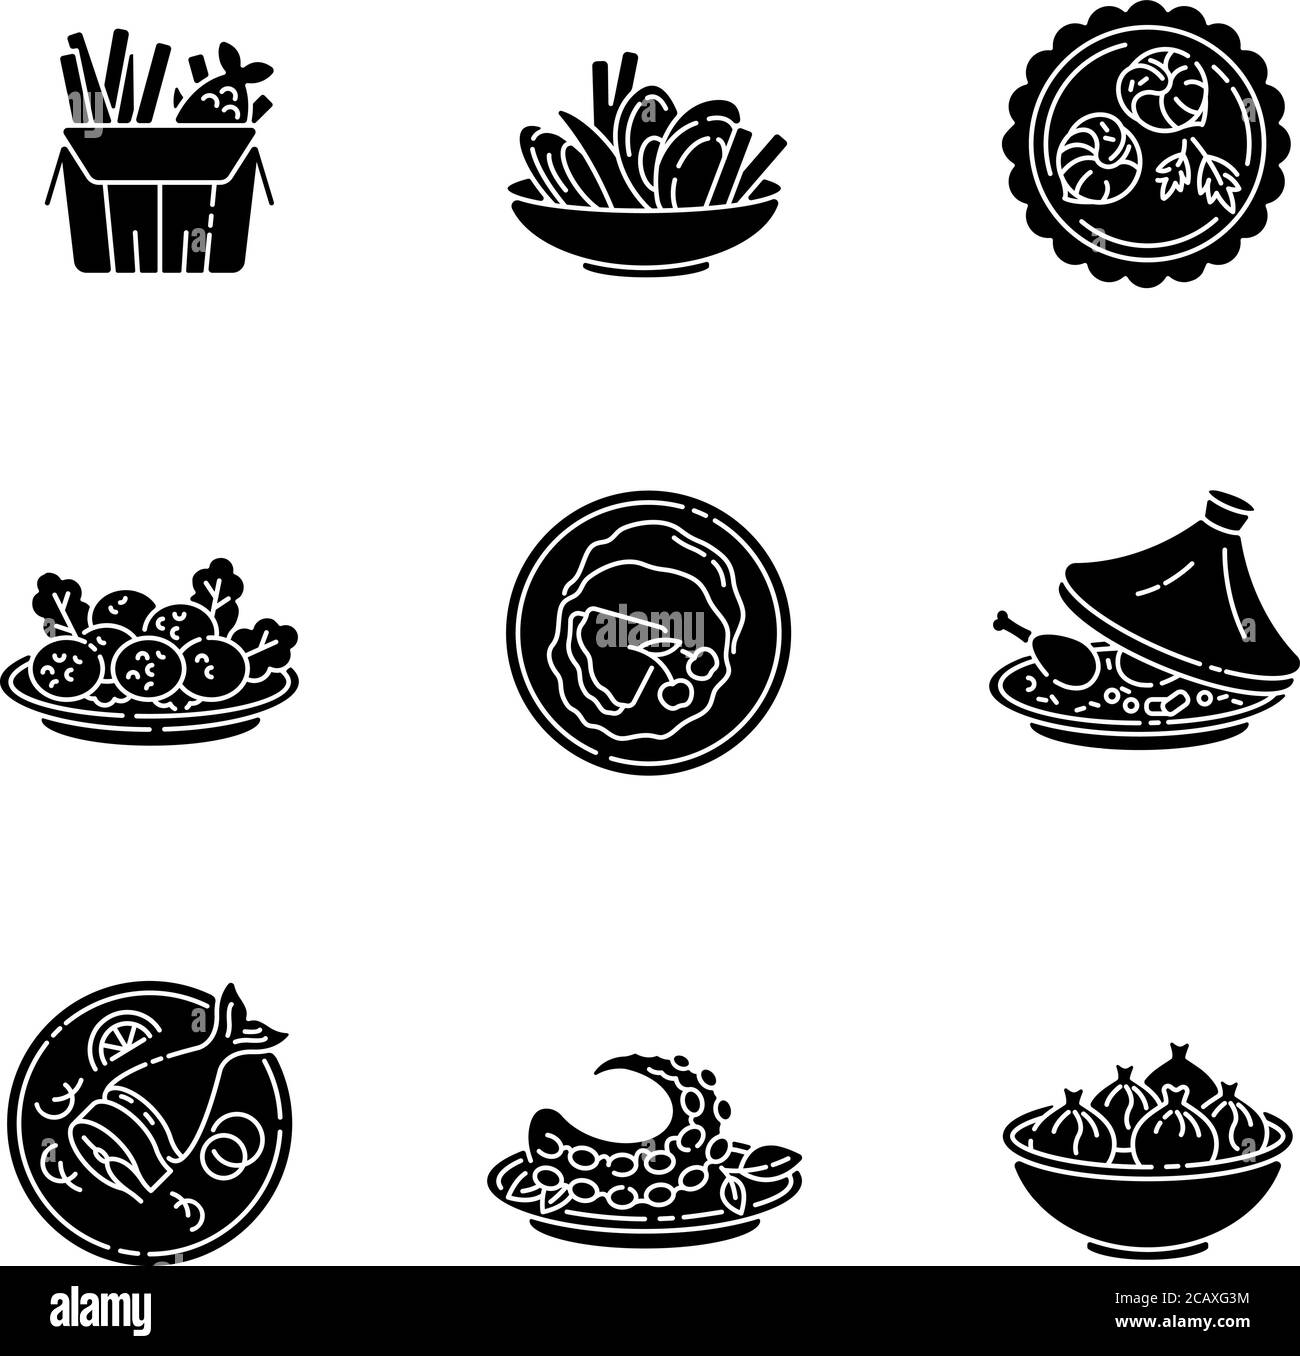 Restaurant dishes black glyph icons set on white space. Fish and chips. Moules frites. Falafel dish. French crepe. Soused herring. Asian seafood. Silh Stock Vector